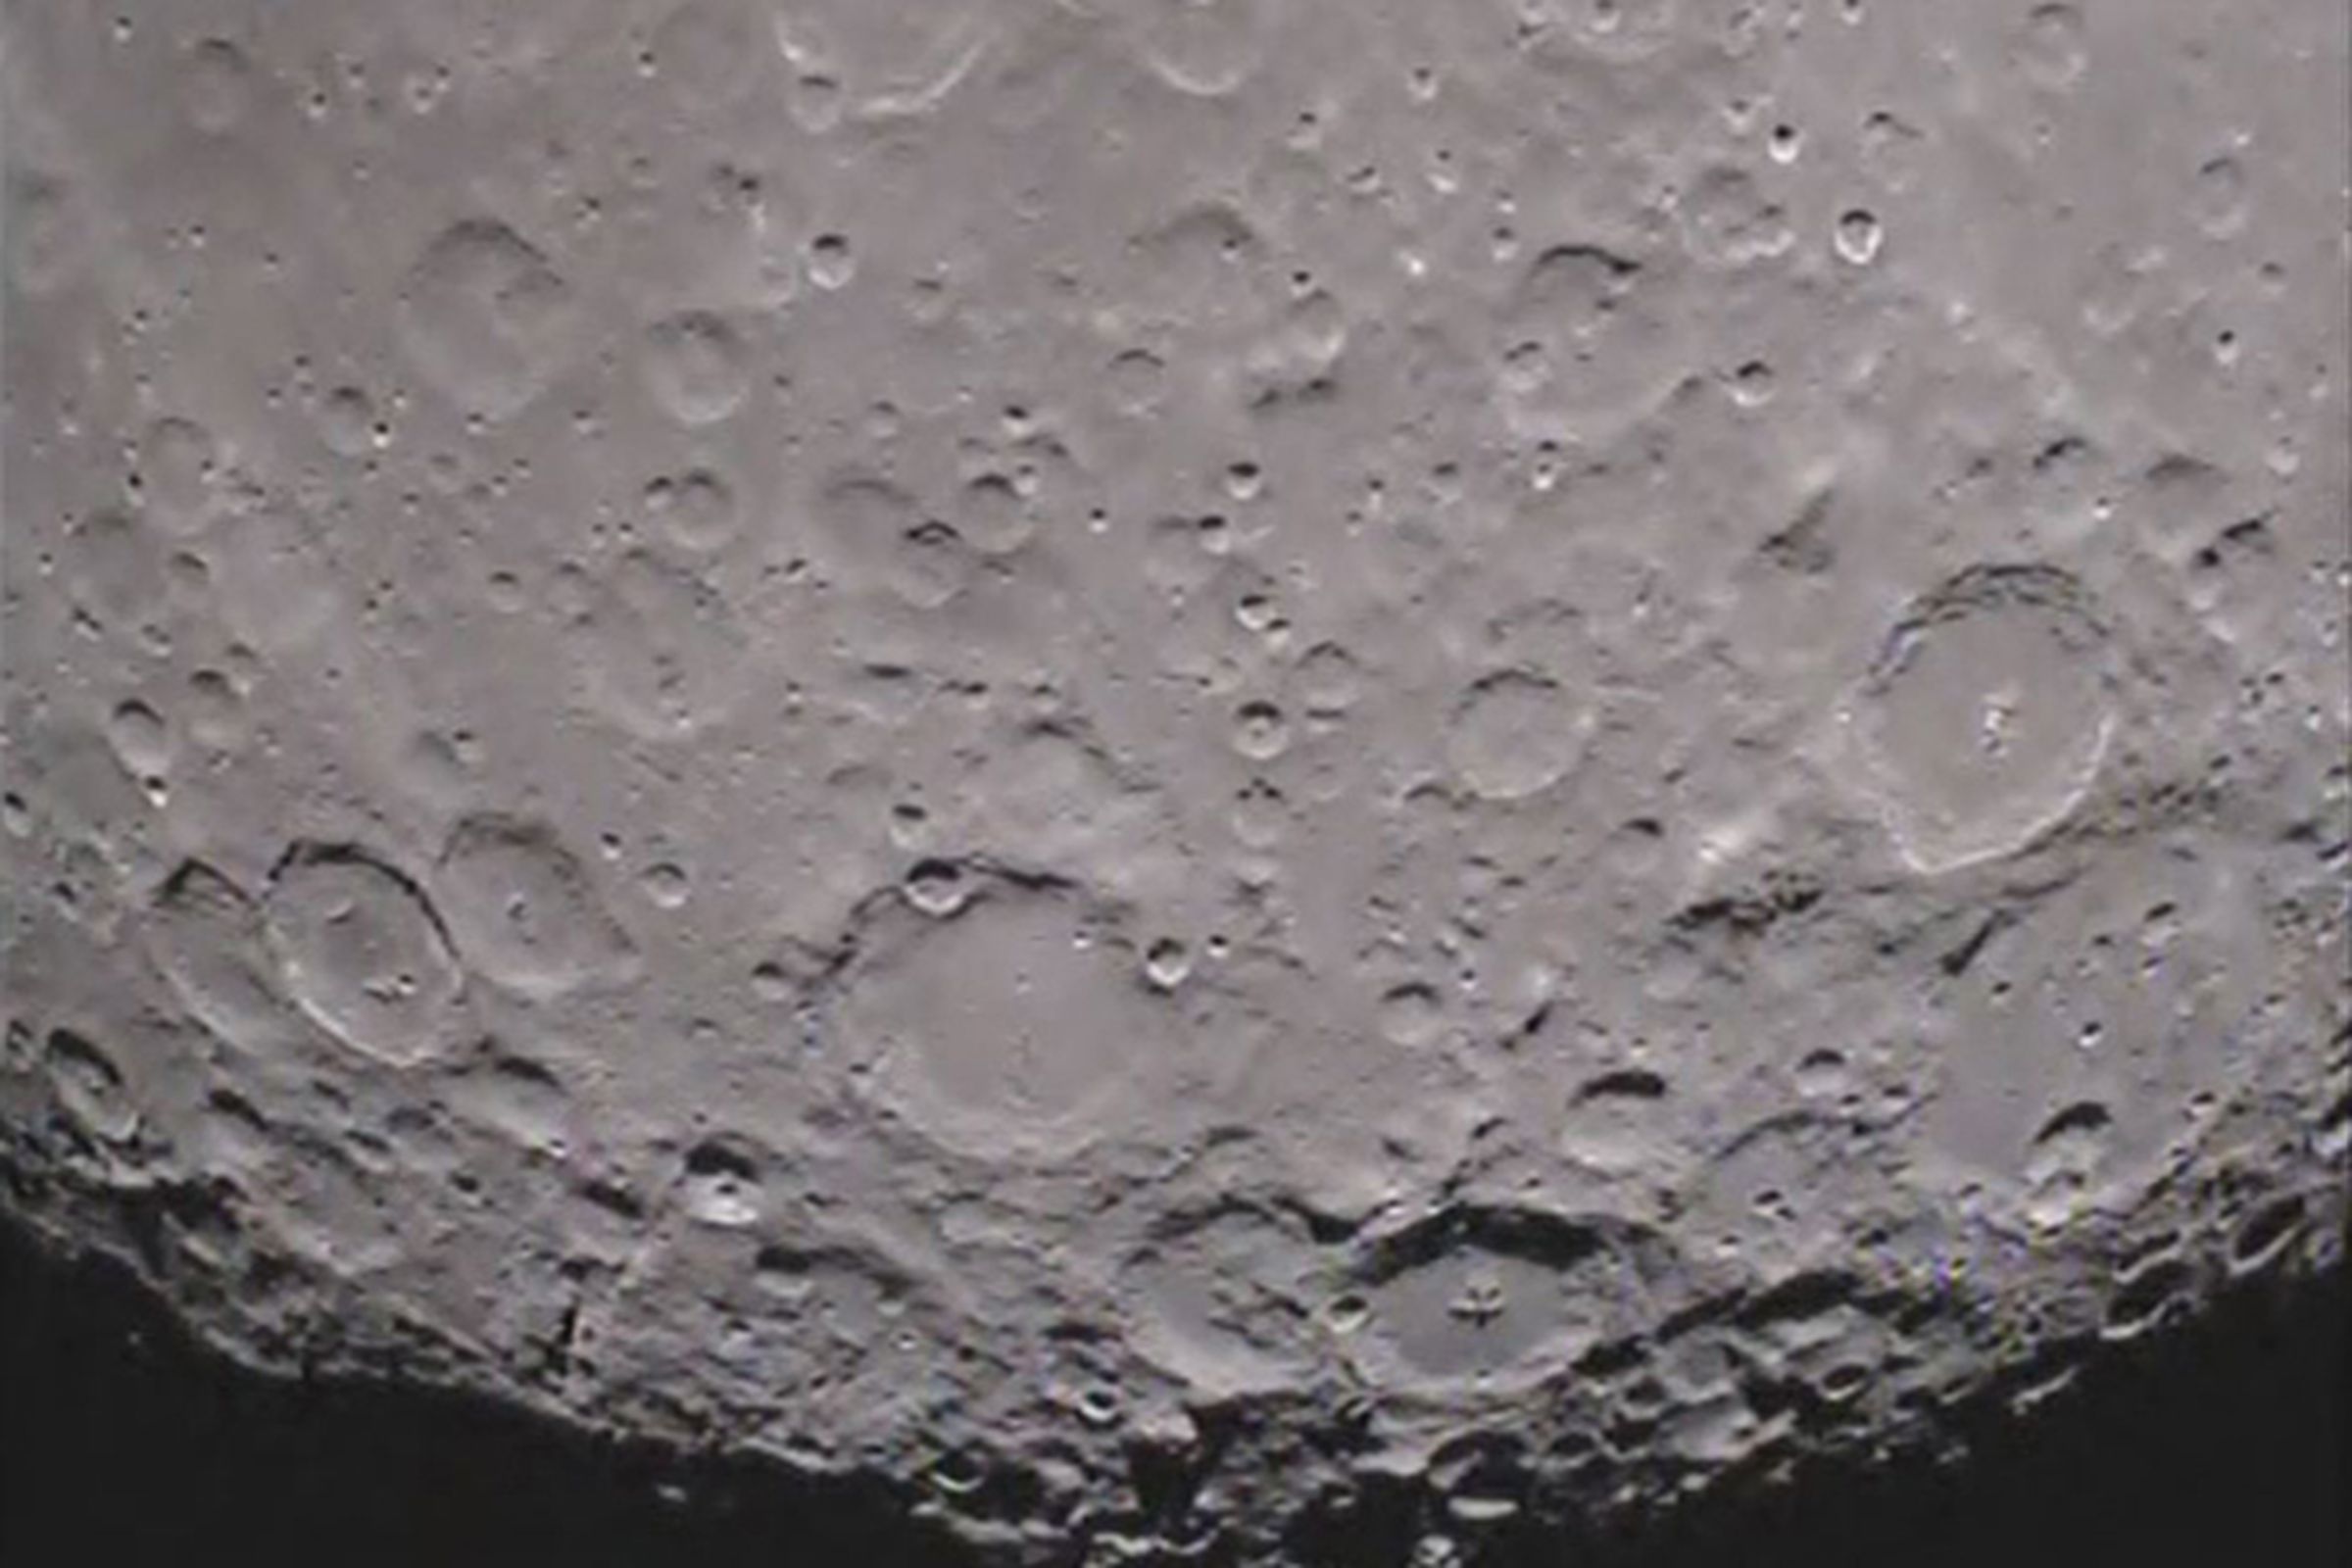 NASA GRAIL Mission Footage of the far side of the moon